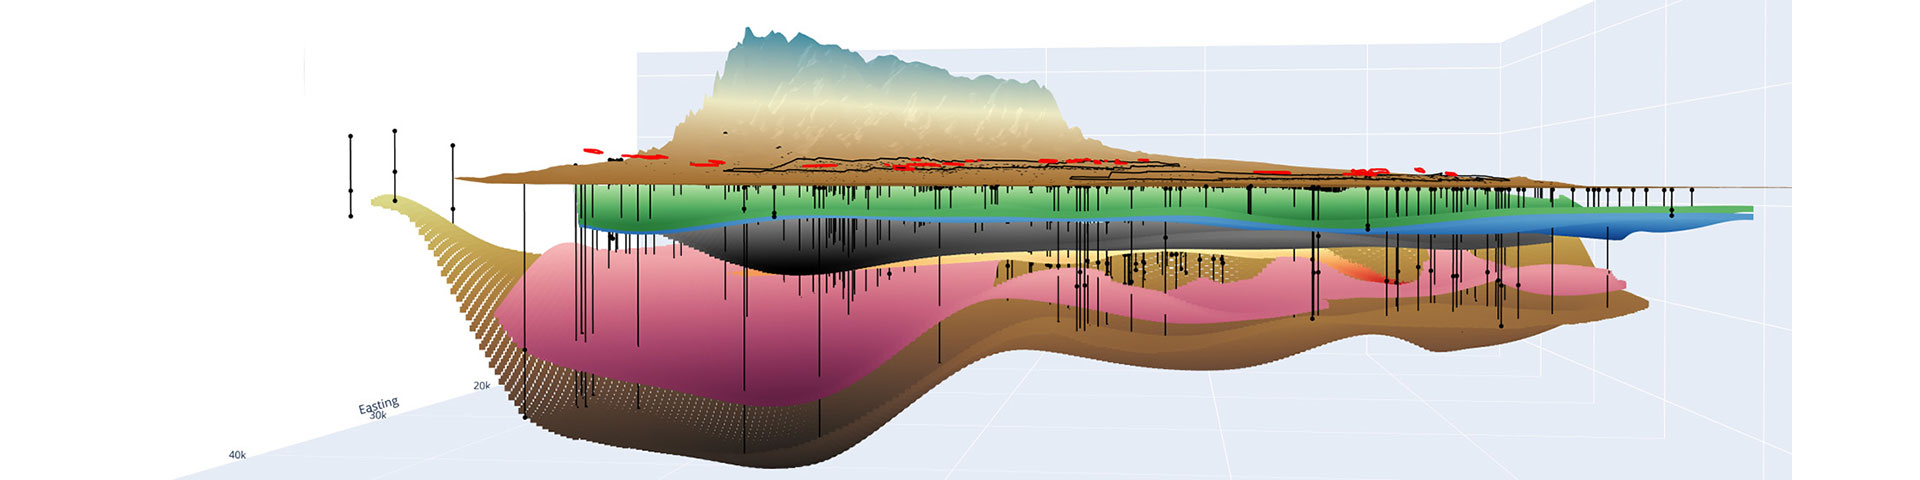 Cross section with geophysical log correlations